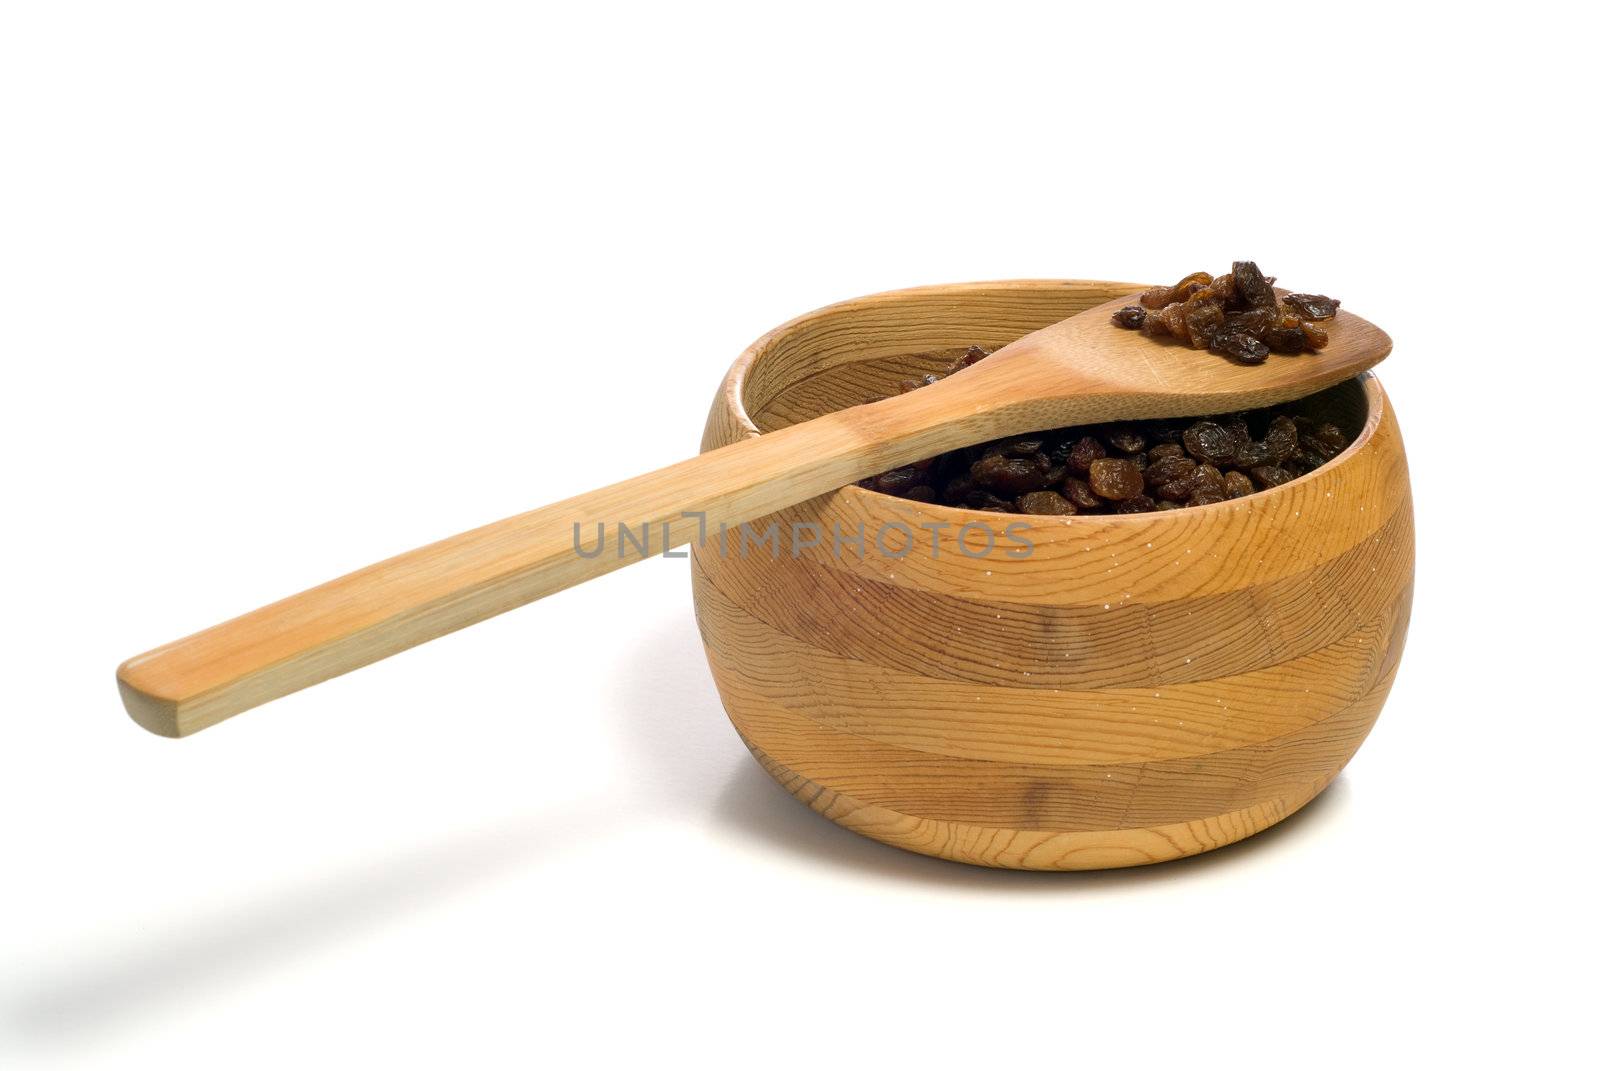 A wooden bowl of raisins with a wooden spoon resting on top, shot on white